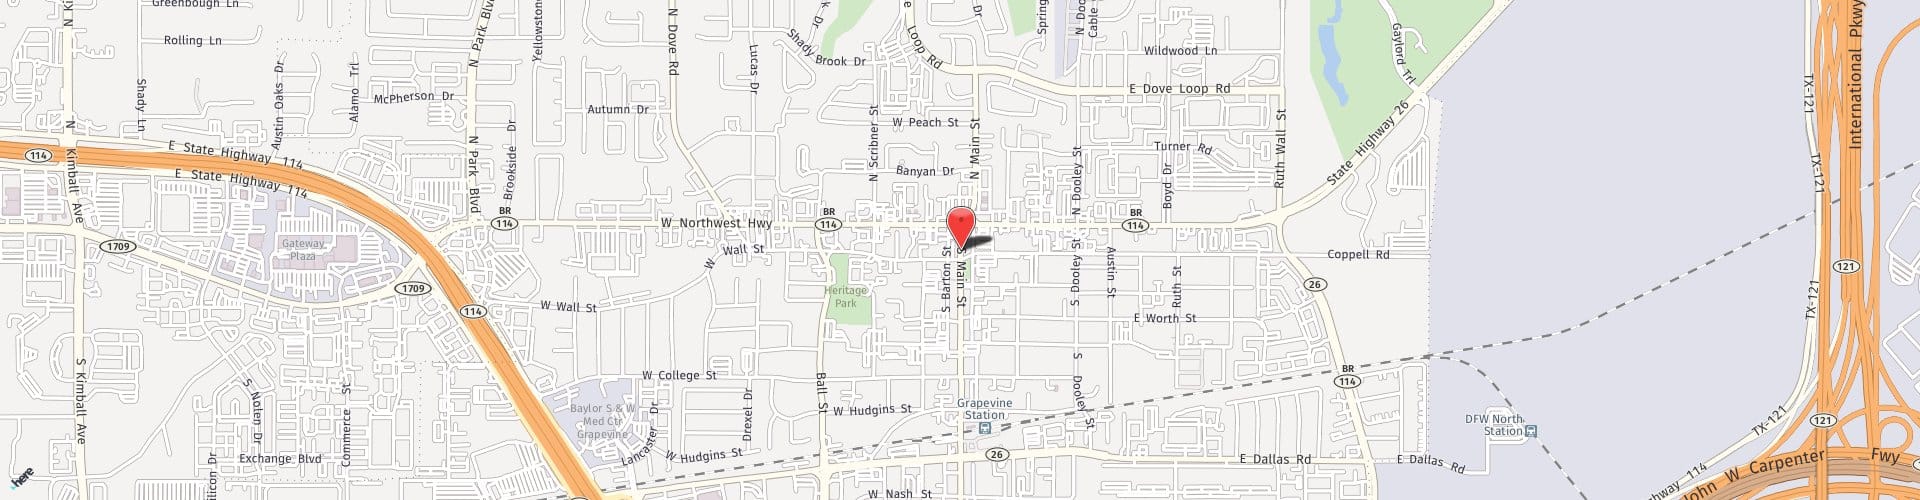 Location Map: 120 S Main St. Grapevine, TX 76051